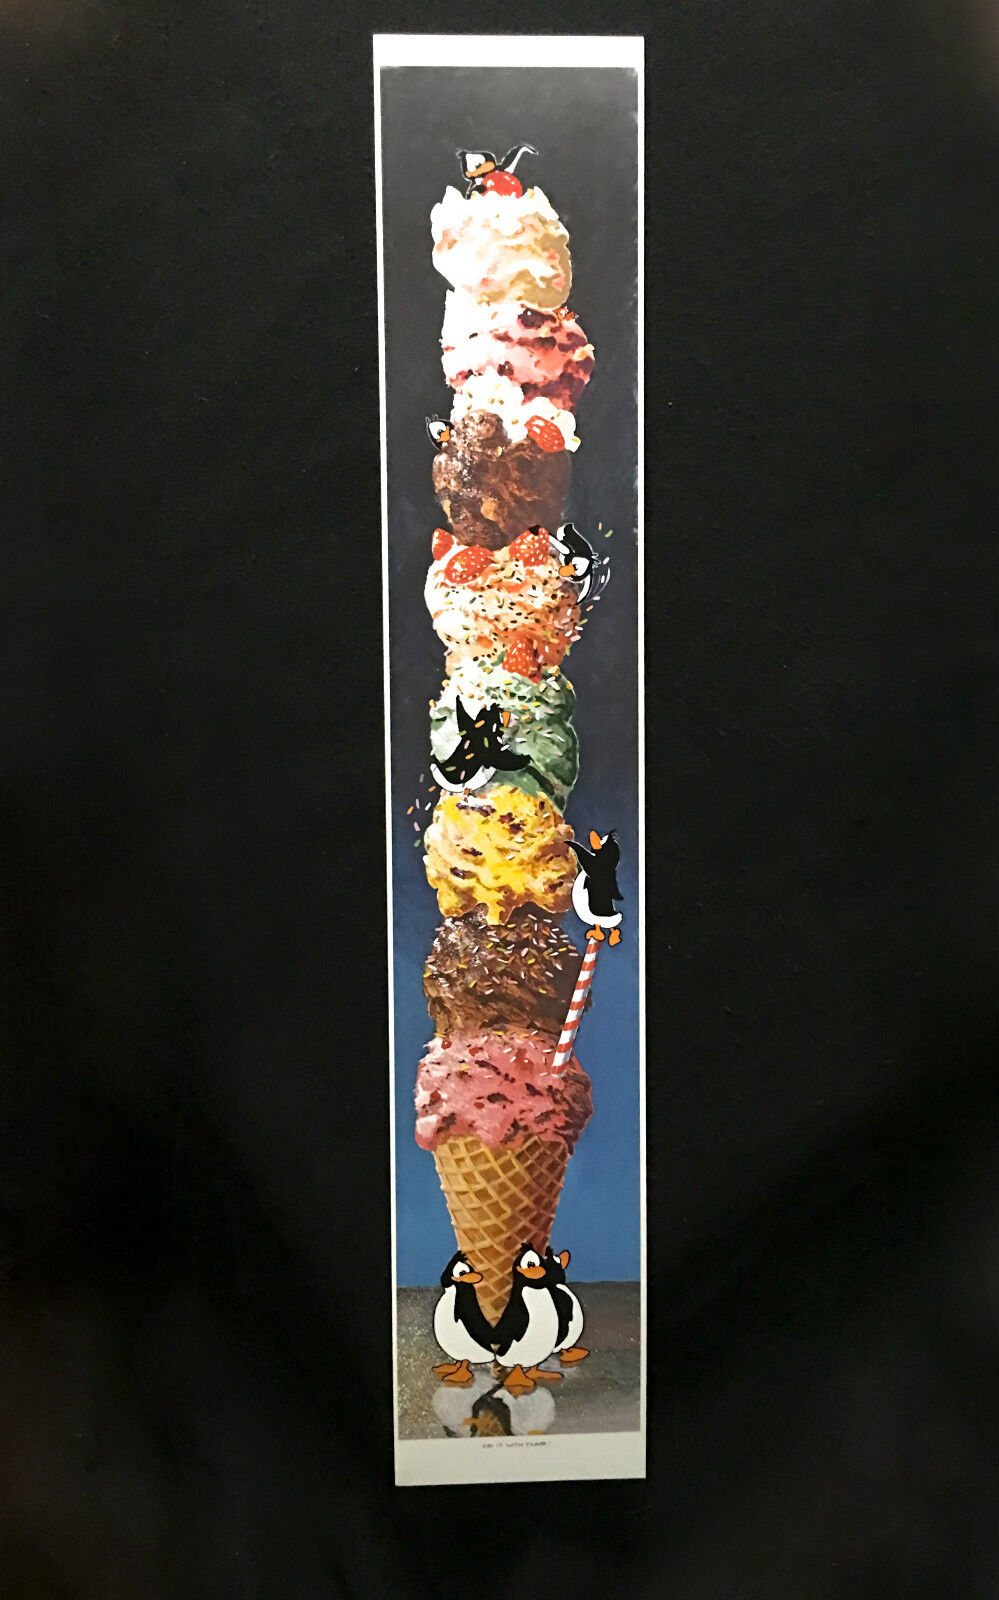 Robert Marble 'Do It With Flair' 35x6.25 Penguin Ice Cream BUY ONE GET ONE/BOGO